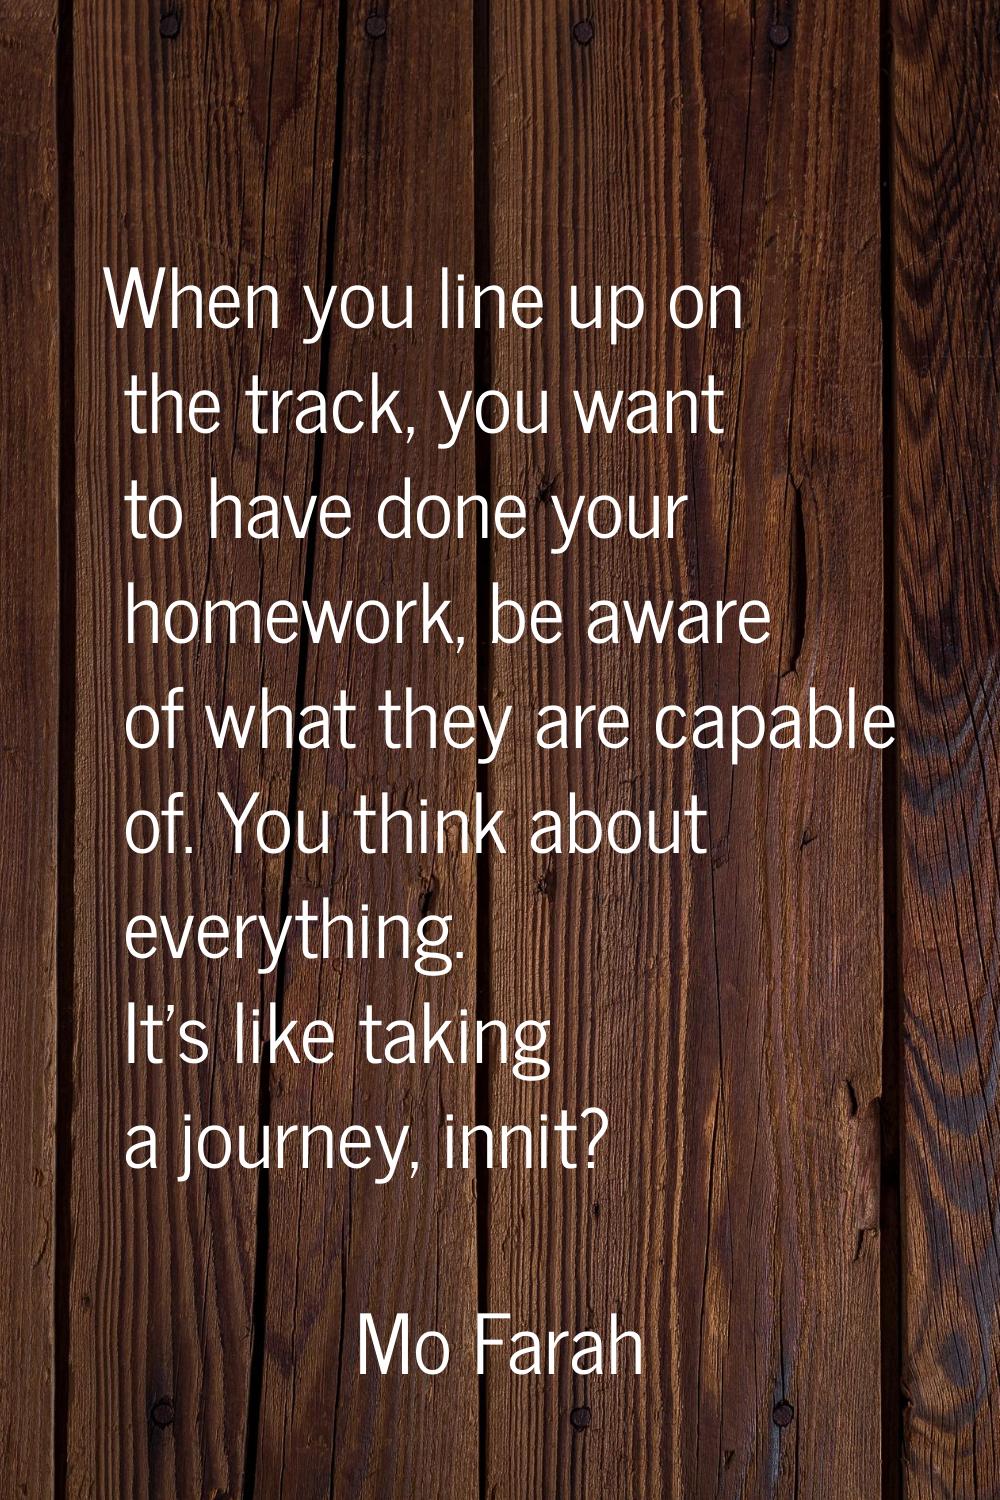 When you line up on the track, you want to have done your homework, be aware of what they are capab